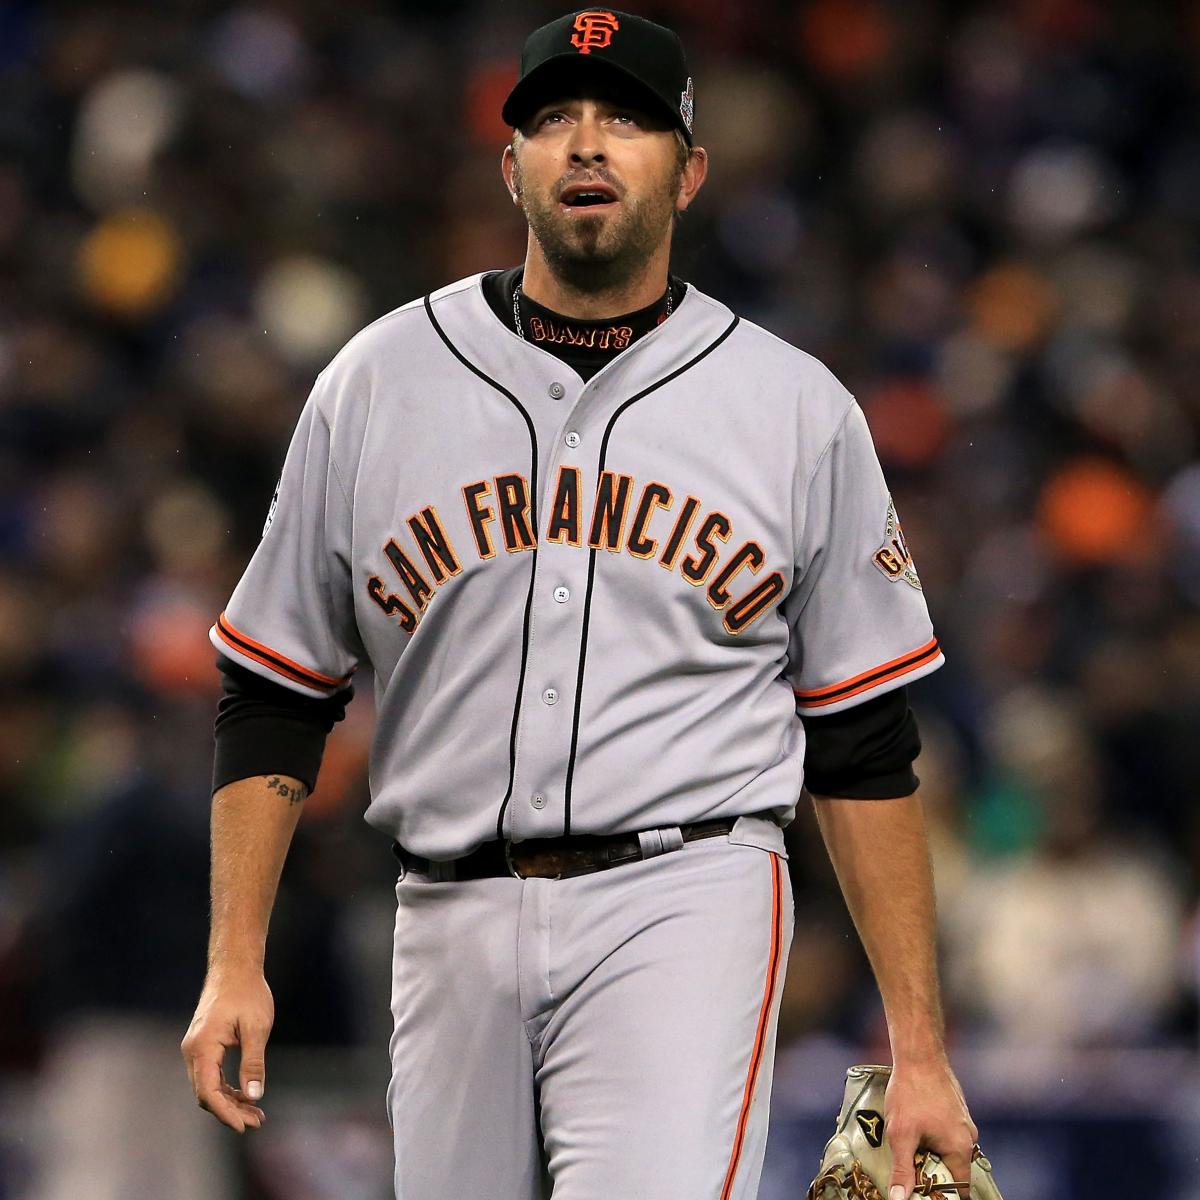 Celebrate the SF Giants' triumph with Jeremy Affeldt and Madison